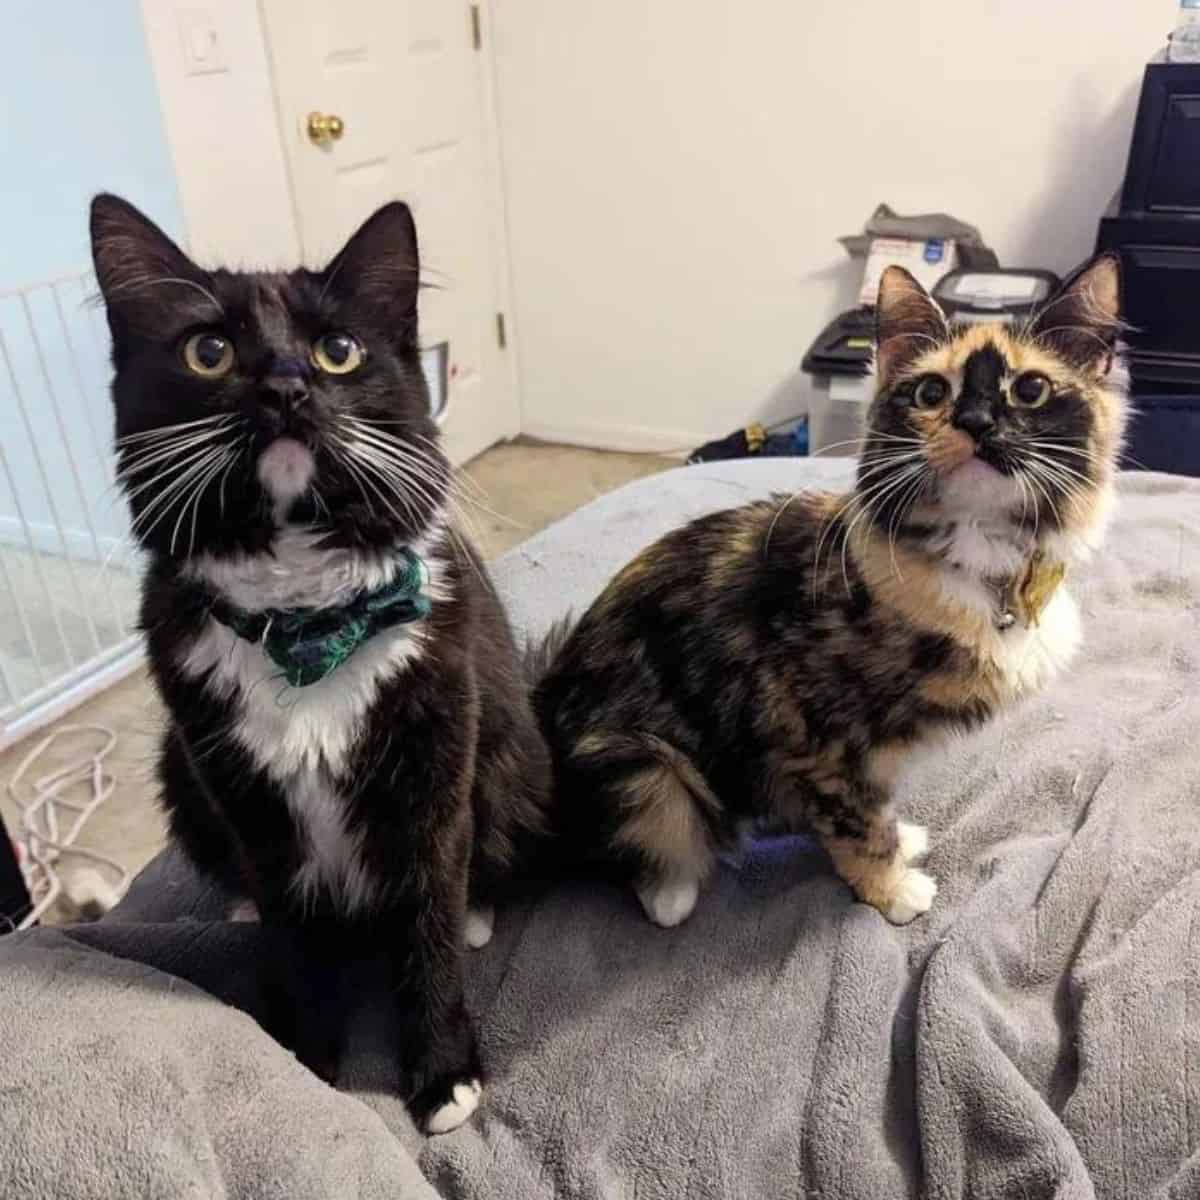 Professor and Bellatrix sitting on the bed and looking up